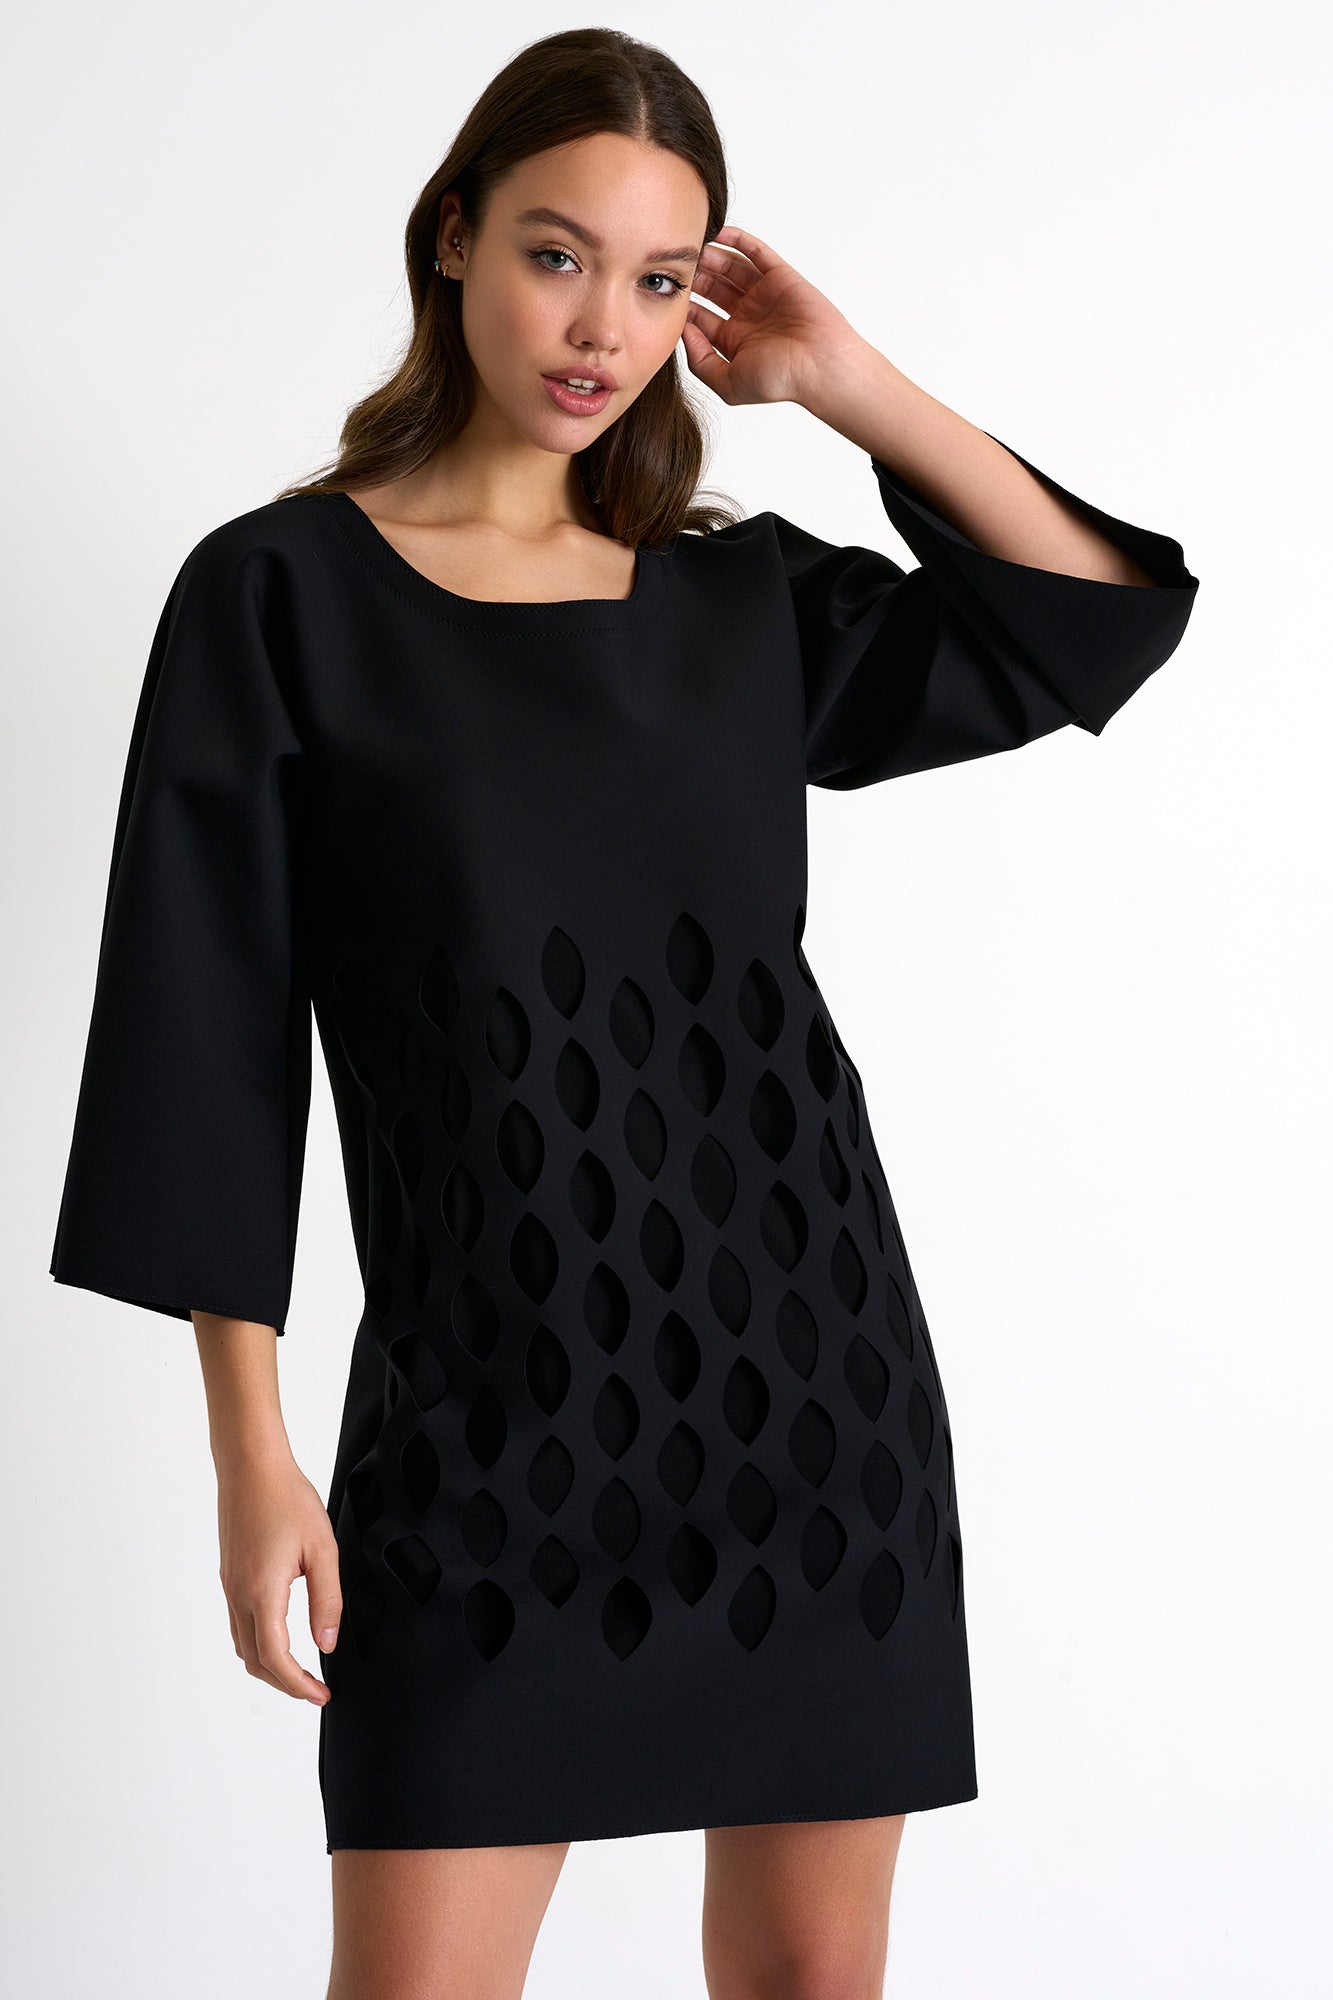 Flared Sleeve Dress With Cut-Out Details - 52357-65-800 02 / 800 Caviar / 75% POLYAMIDE, 25% ELASTANE